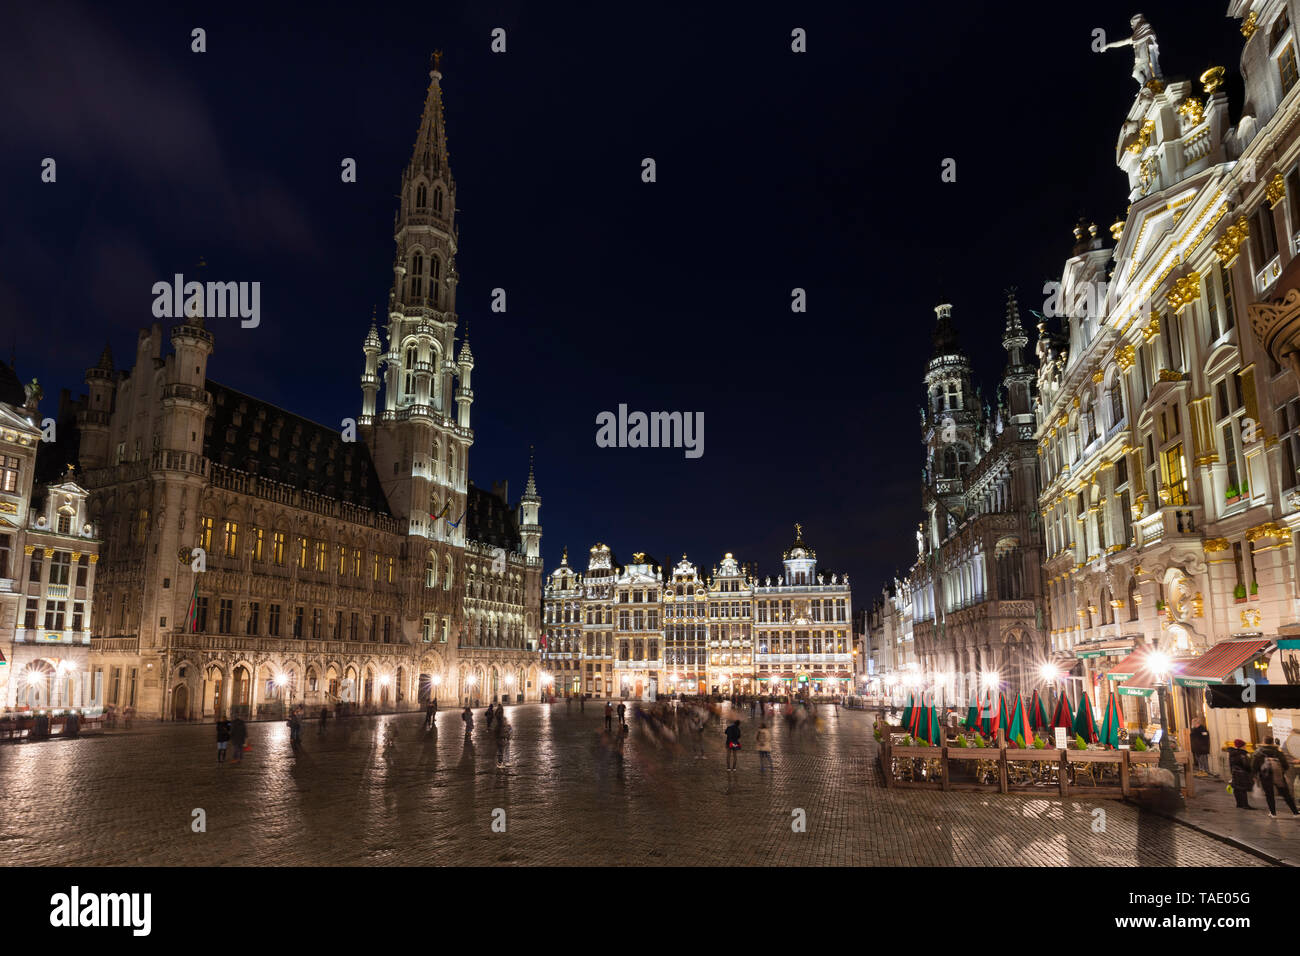 Belgium, Brussels, Grand Place, Townhall and guildhalls at night Stock Photo